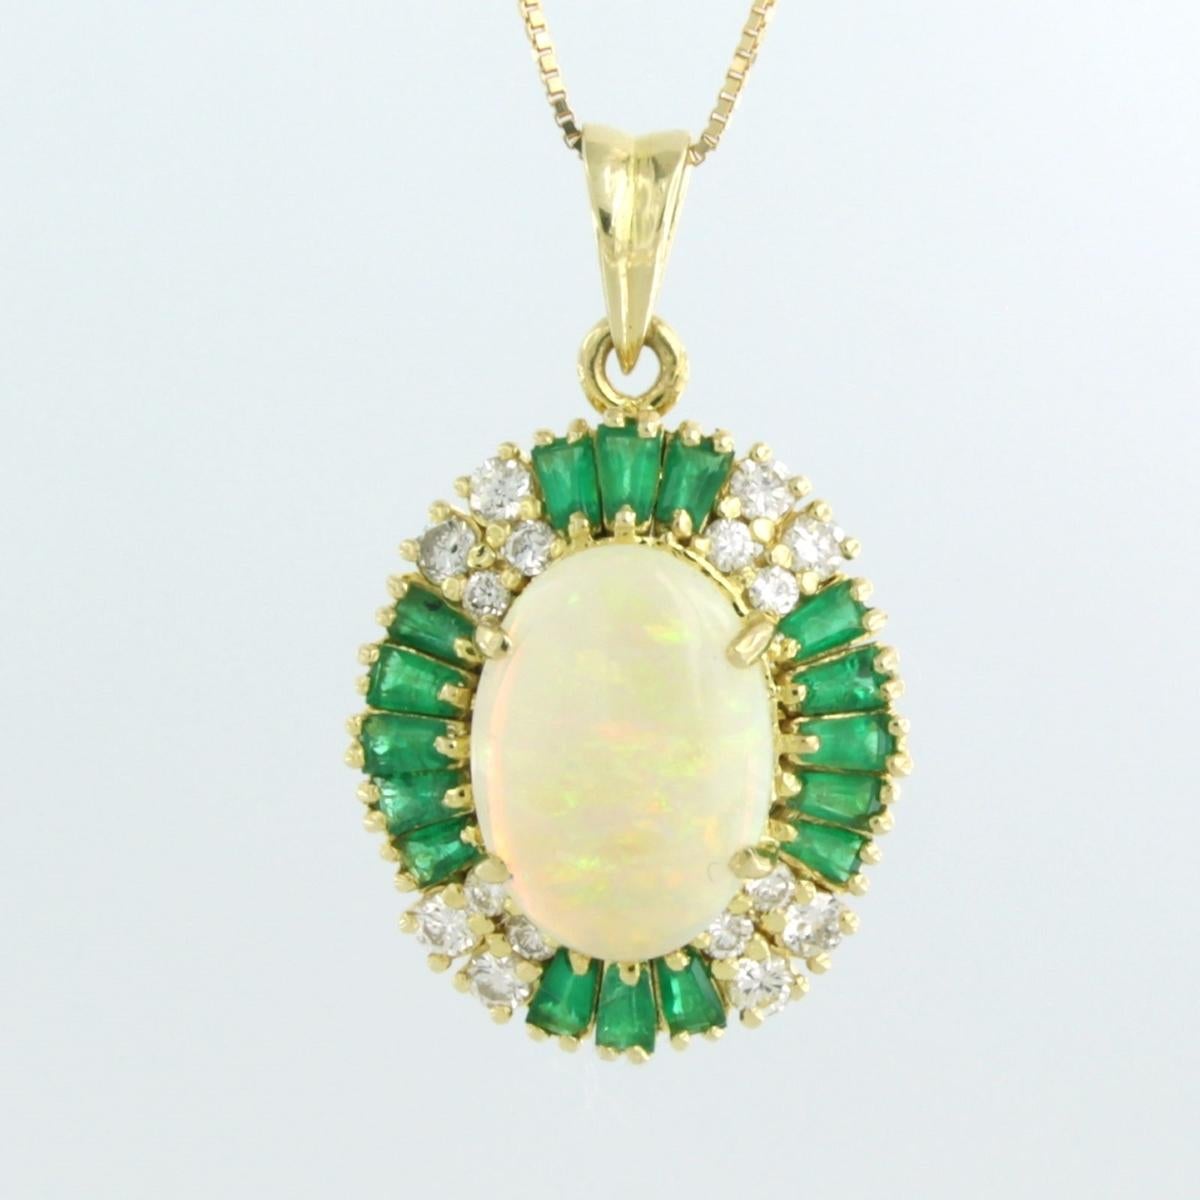 18 kt yellow gold necklace with pendant set with opal, emerald and brilliant cut diamond to. 0.50ct F/G - VS/SI - 45 cm long

detailed description:

the size of the pendant is 3.0 cm long by 1.9 cm wide.

length of the necklace is 45 cm long and 0.7